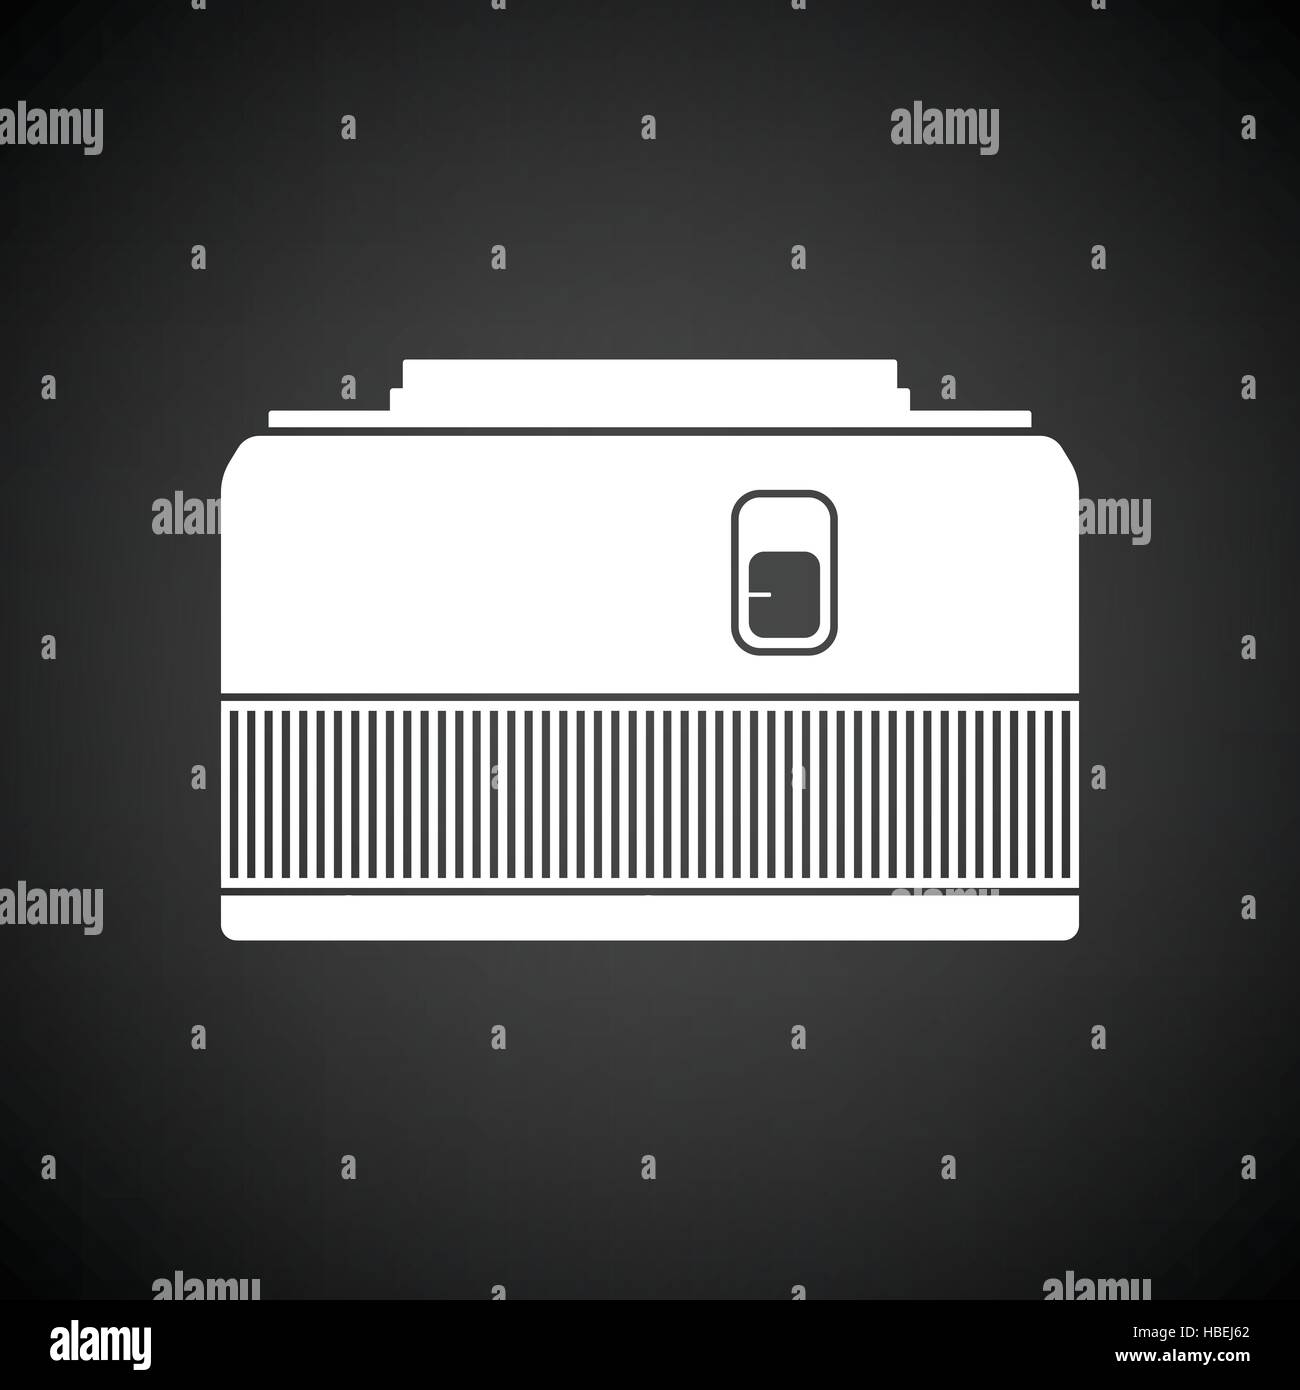 Icon of photo camera 50 mm lens. Black background with white. Vector illustration. Stock Vector